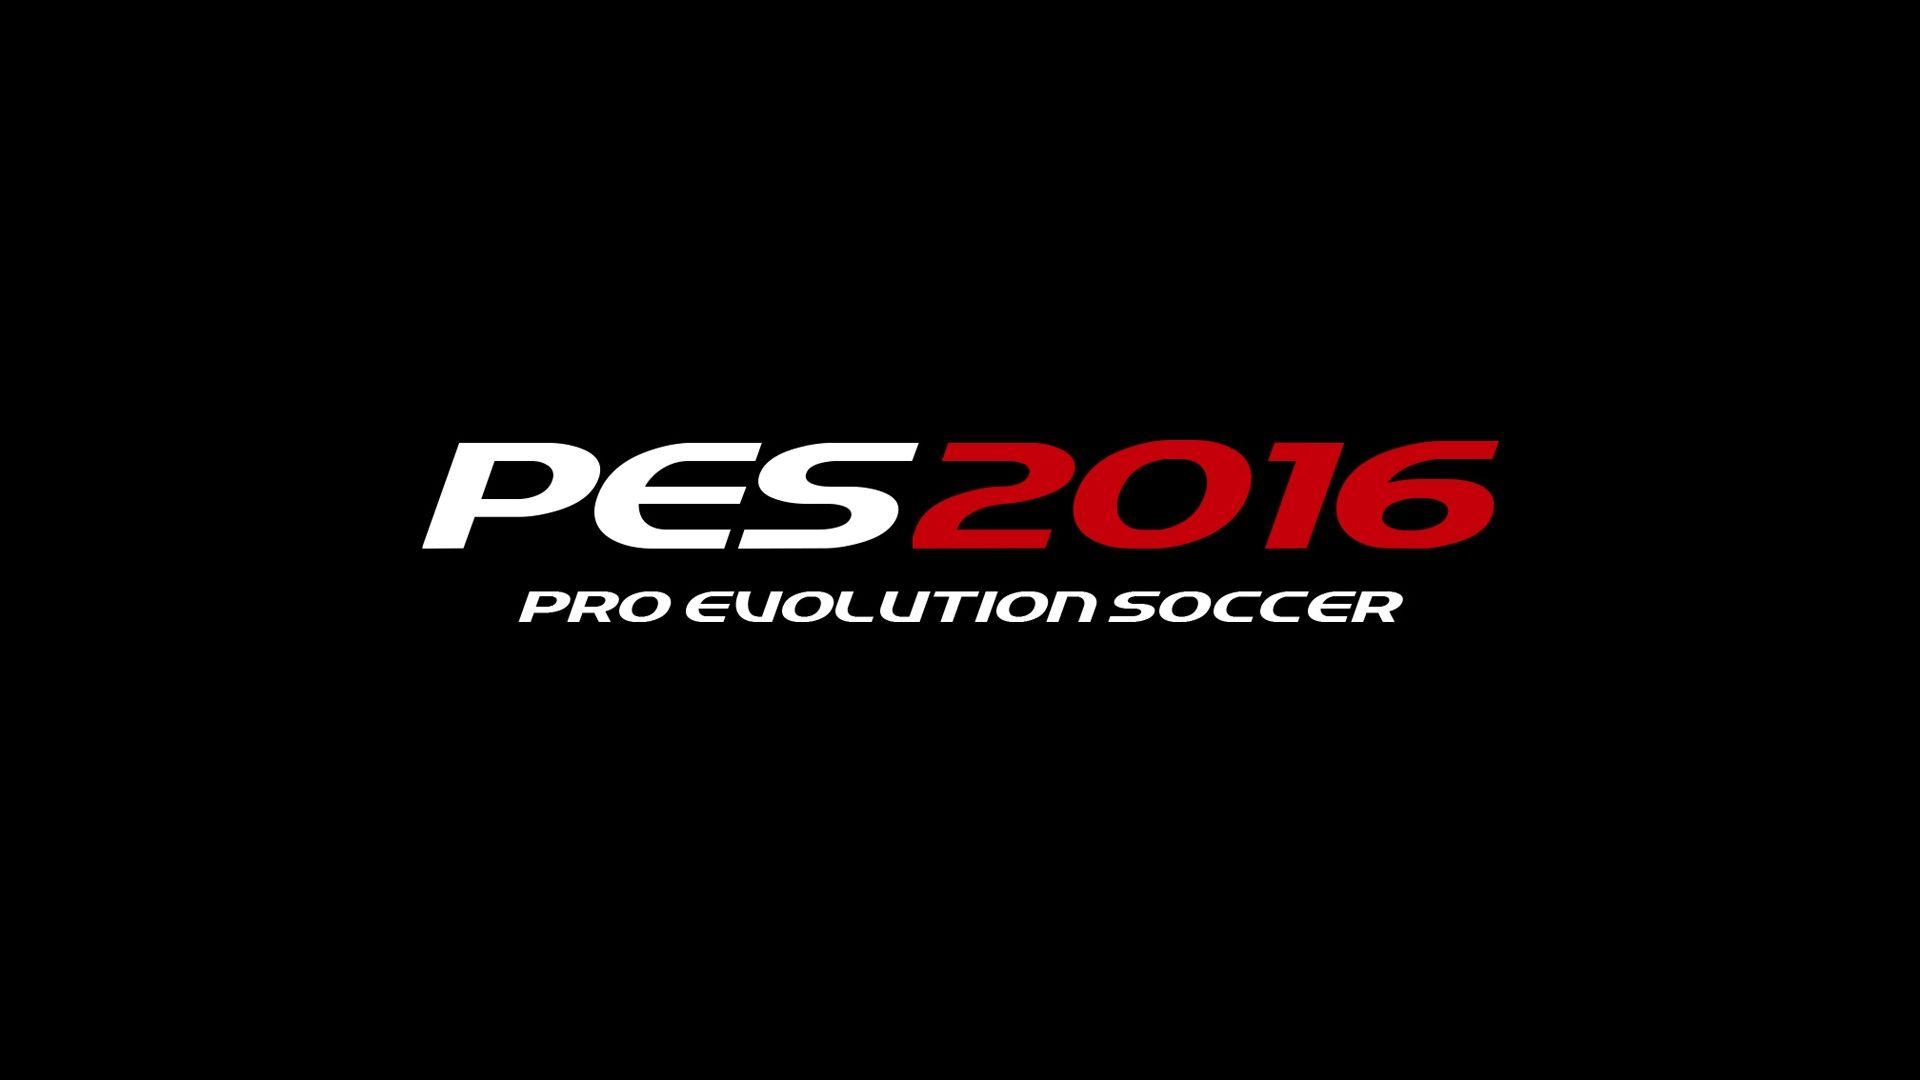 Pro Evolution Soccer 2016 Background. Full HD Picture